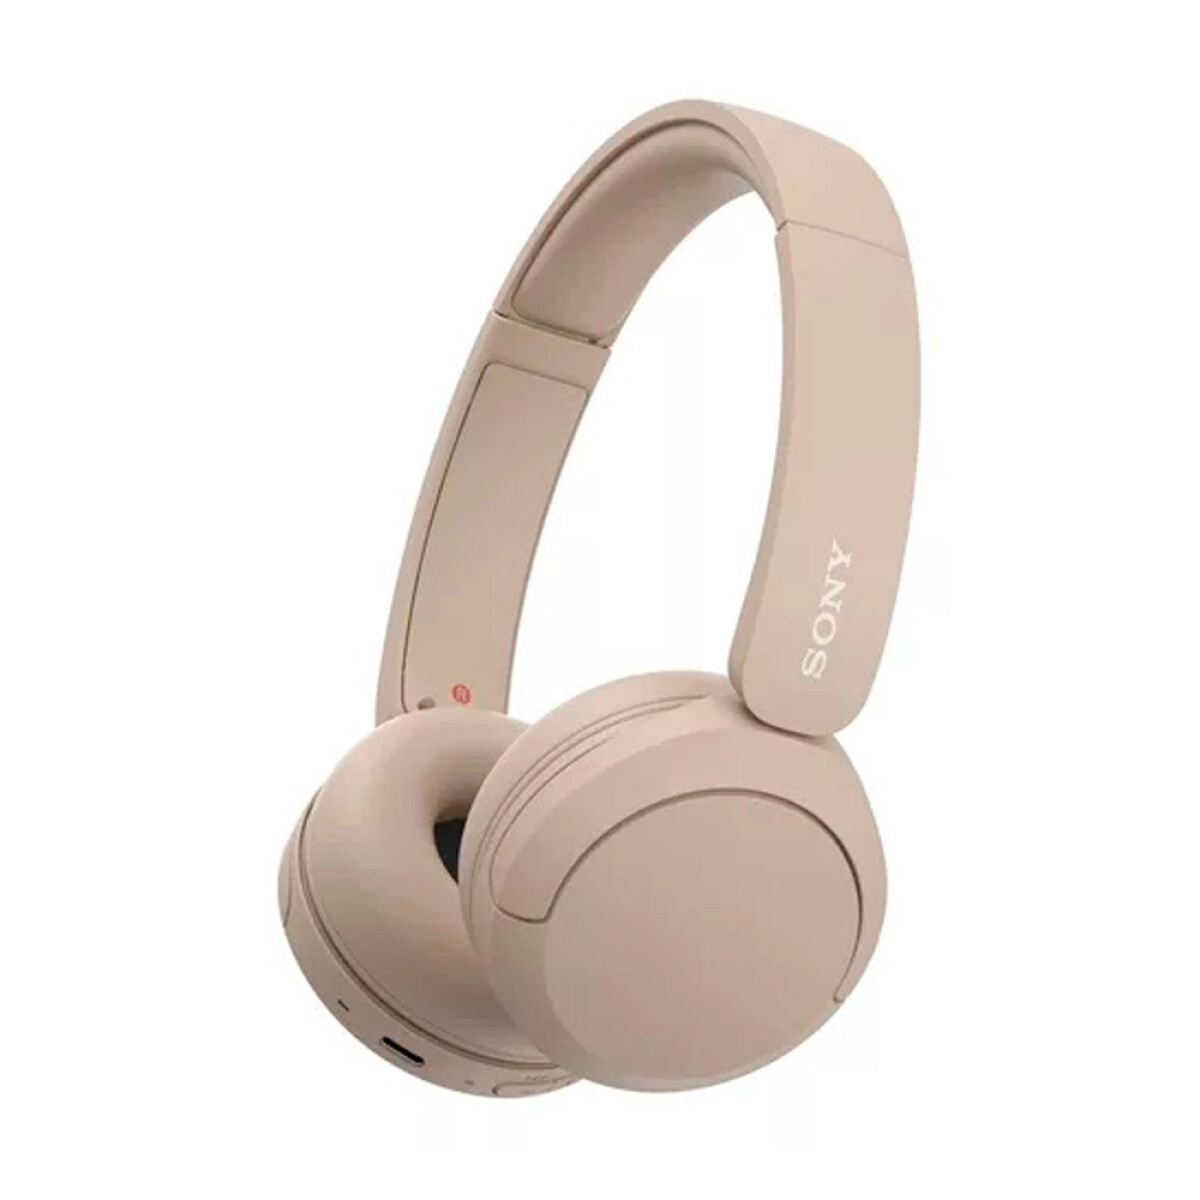 Auriculares Inalambricos Sony WH-CH520 - Beige 